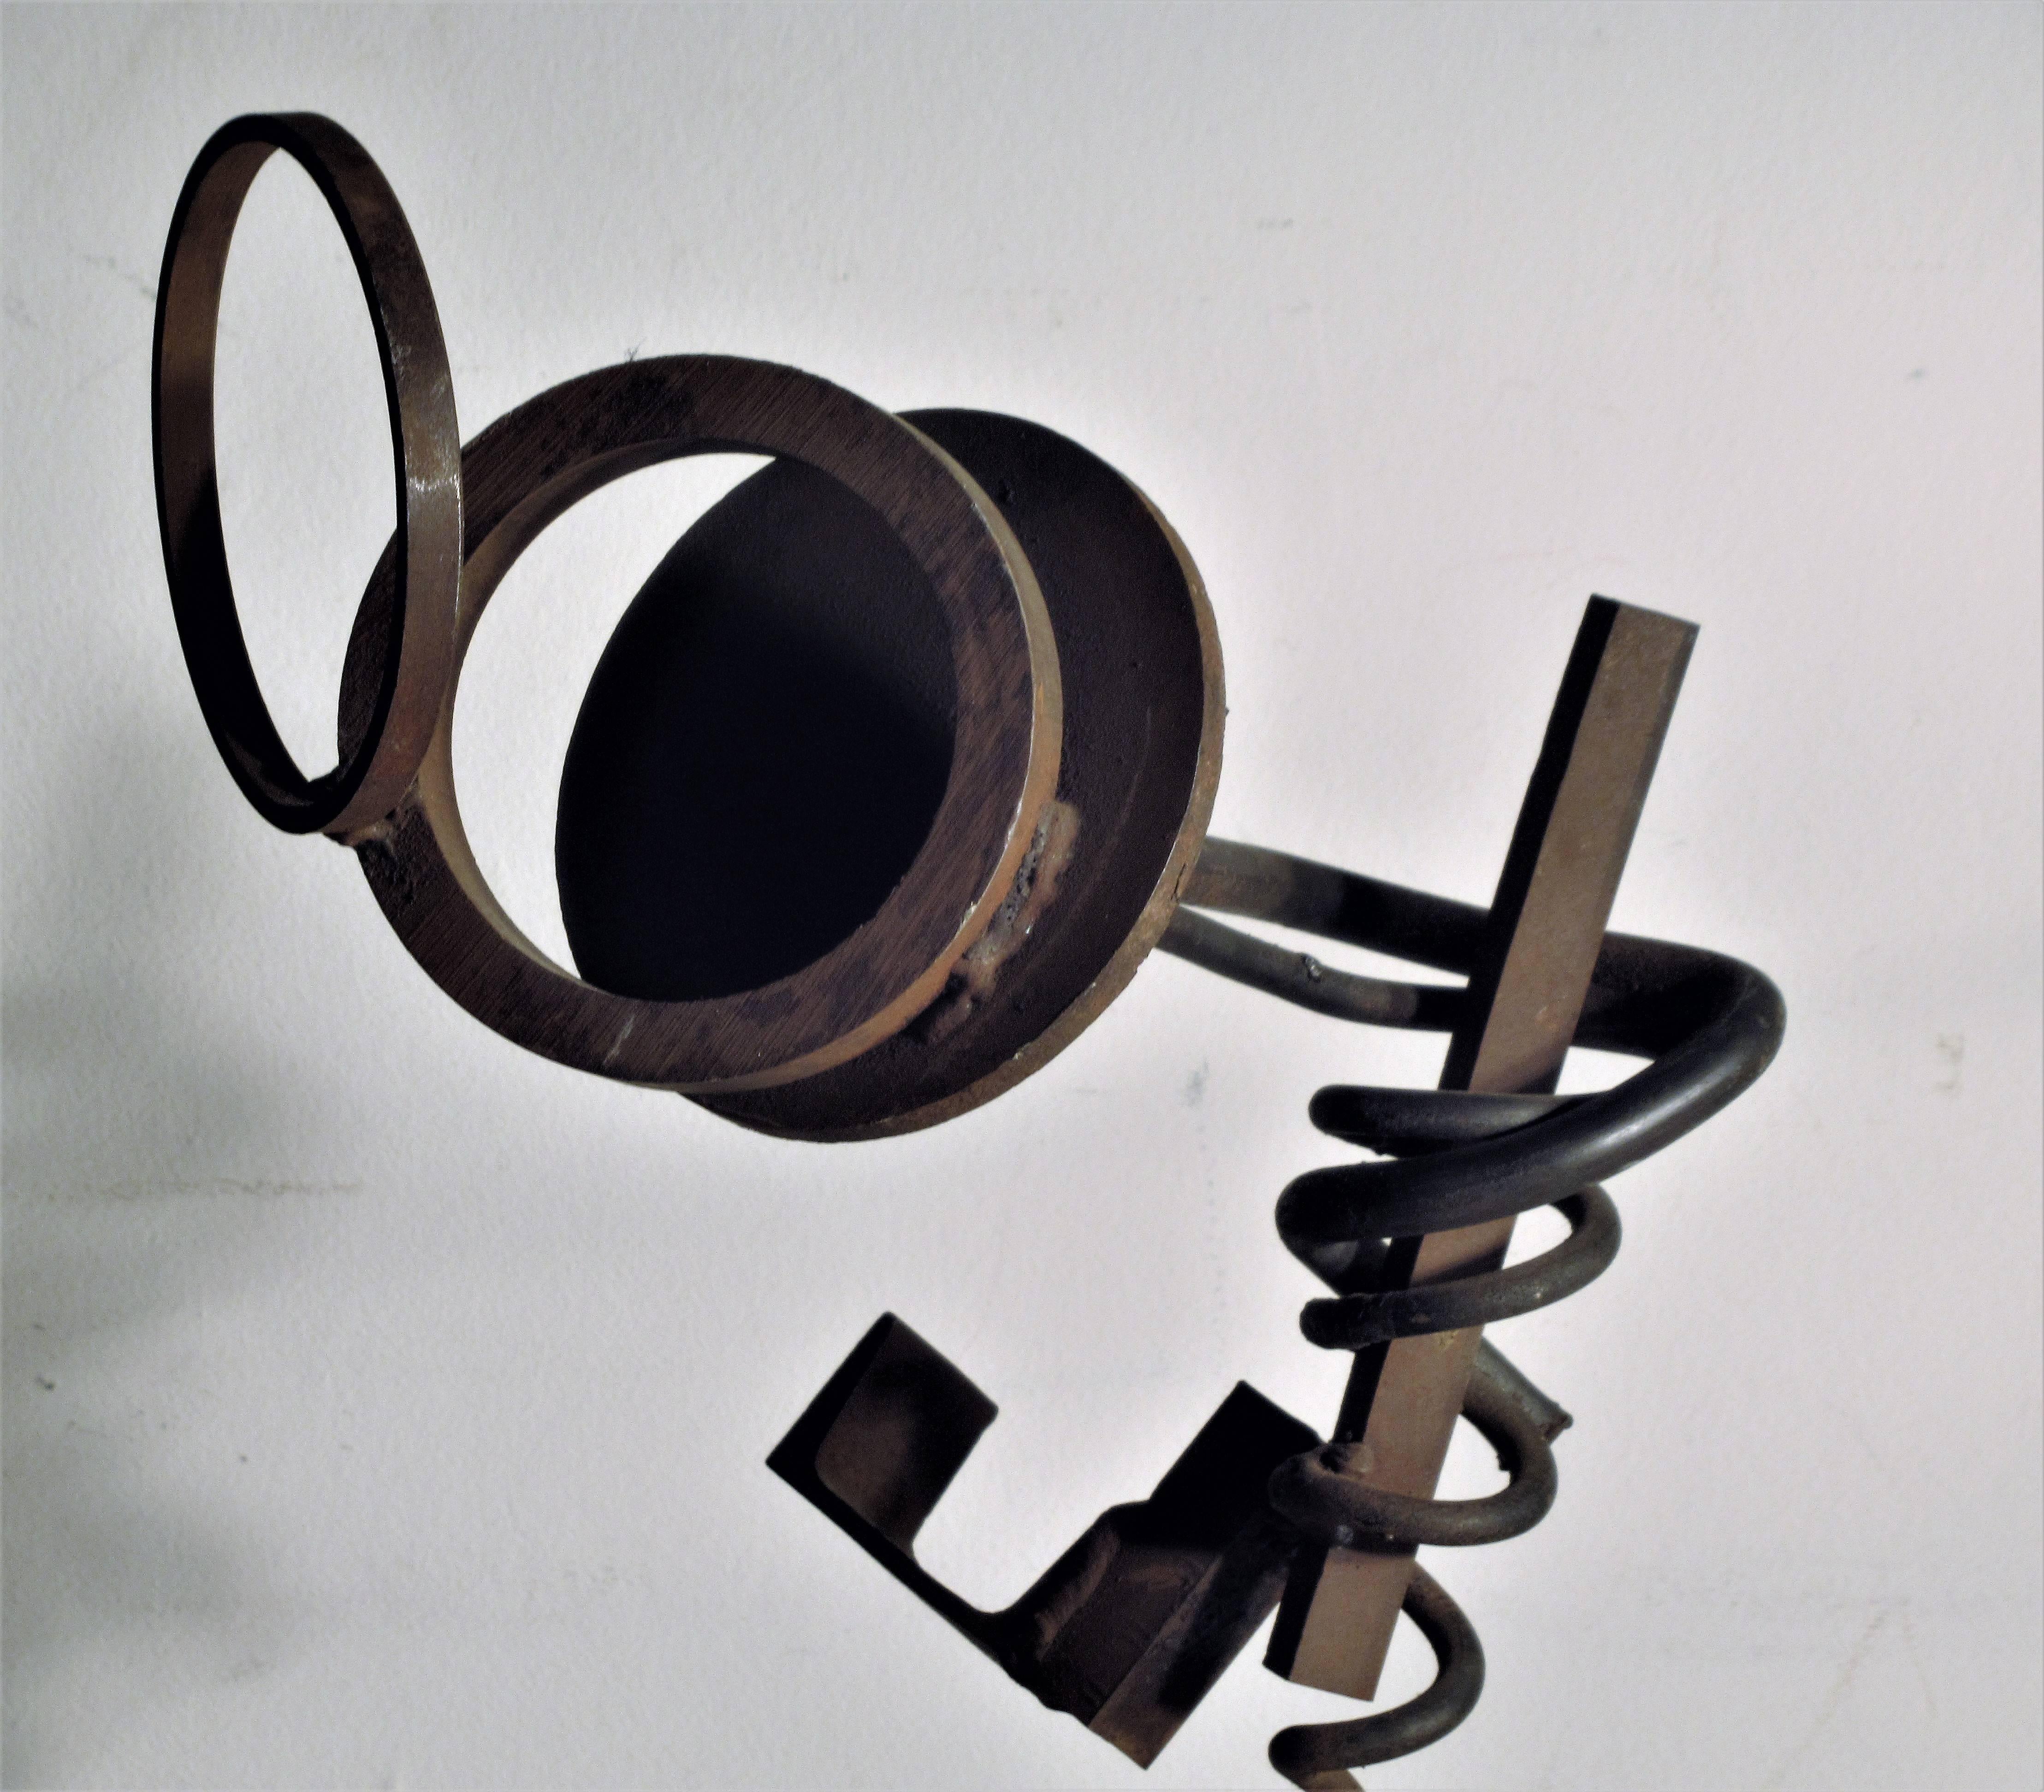 Constructivist steel sculpture in beautifully aged original old raw and painted surface. This is direct from the personal collection of well exhibited and award winning American artist sculptor William F. Sellers ( 1929 - 2019 ) a contemporary of